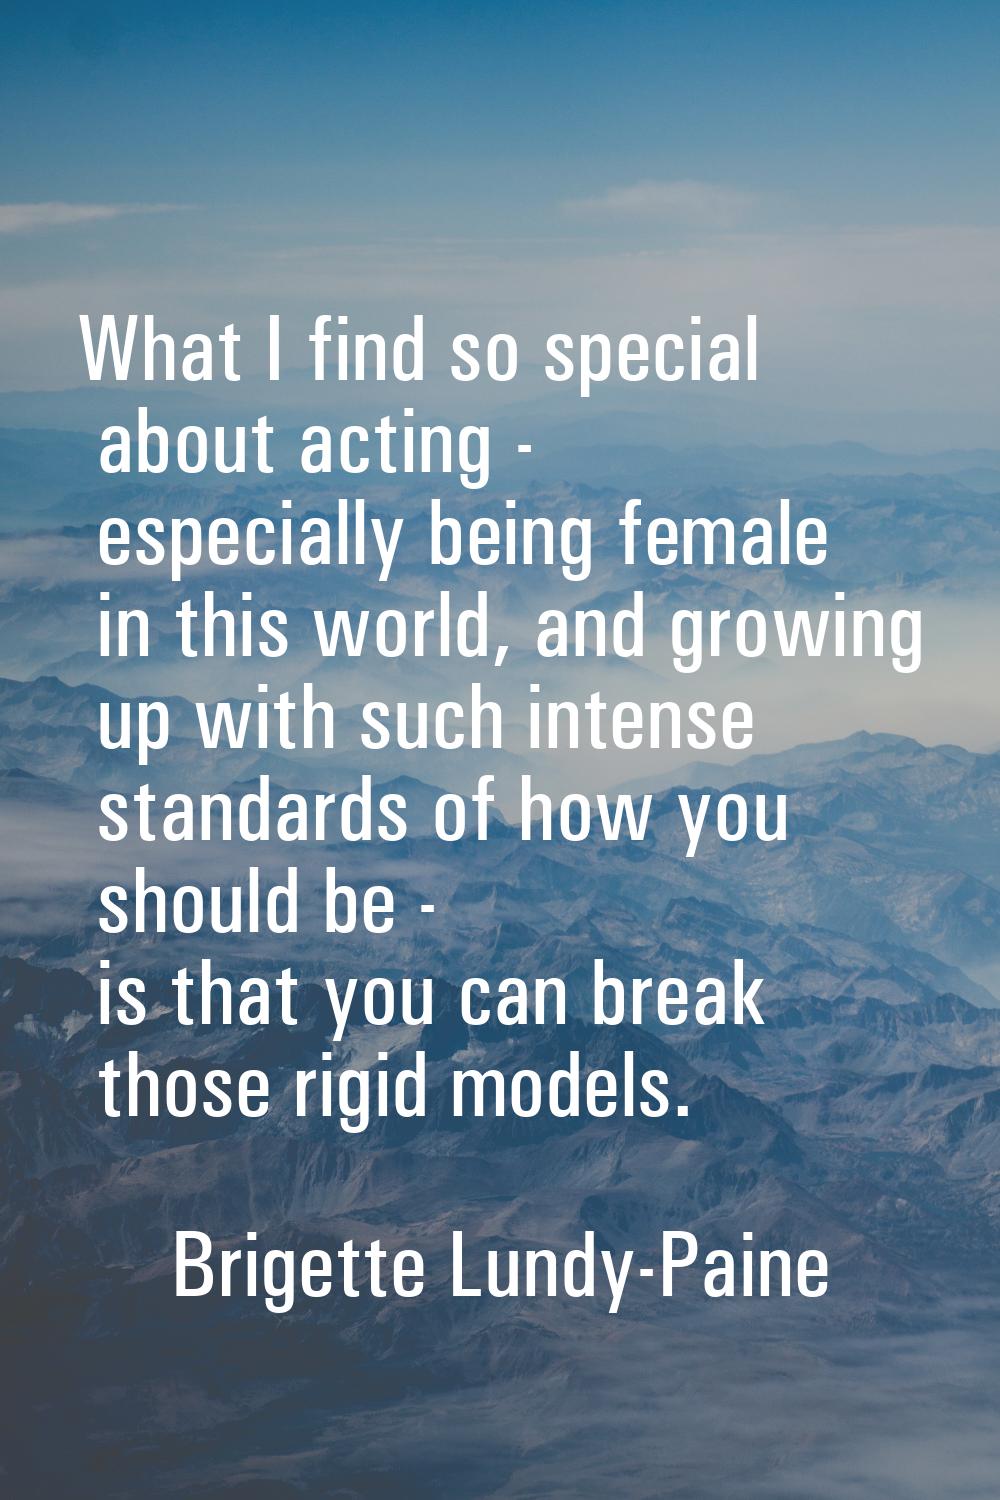 What I find so special about acting - especially being female in this world, and growing up with su